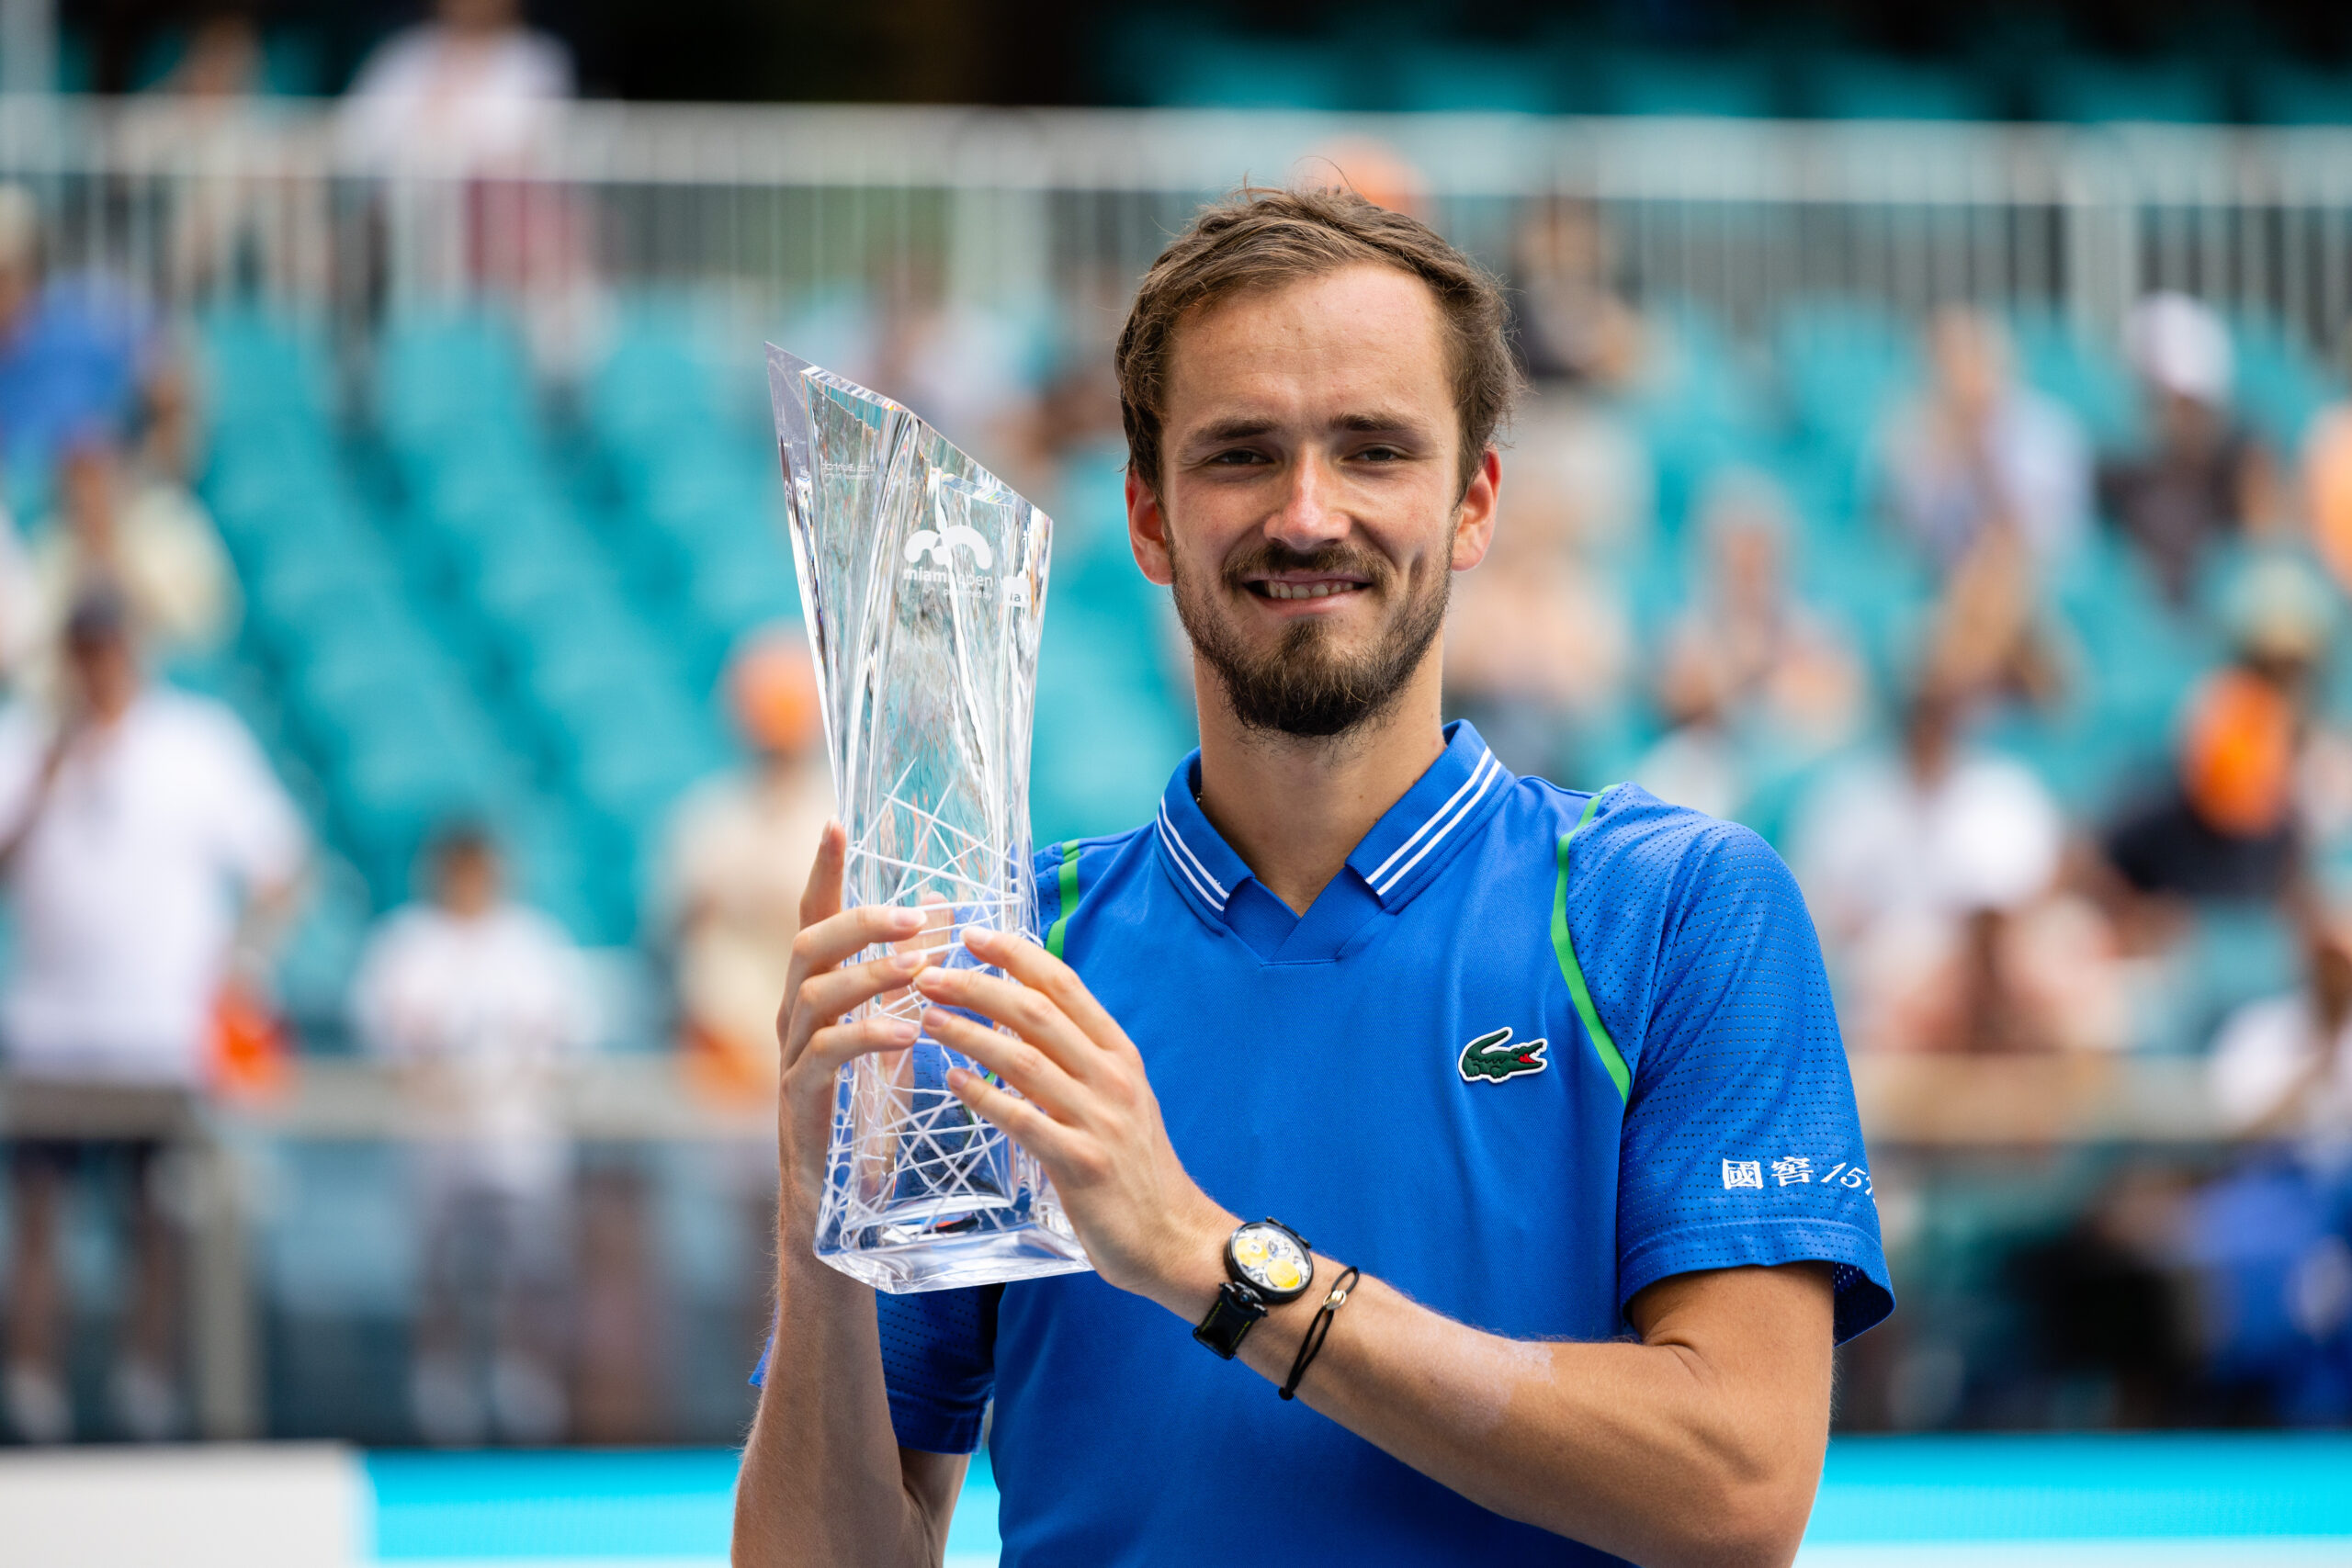 Daniil Medvedev poses with the Miami Open trophy after winning the 2023 Men's Singles Final on April 2, 2023 at Hard Rock Stadium in Miami Gardens, Florida.